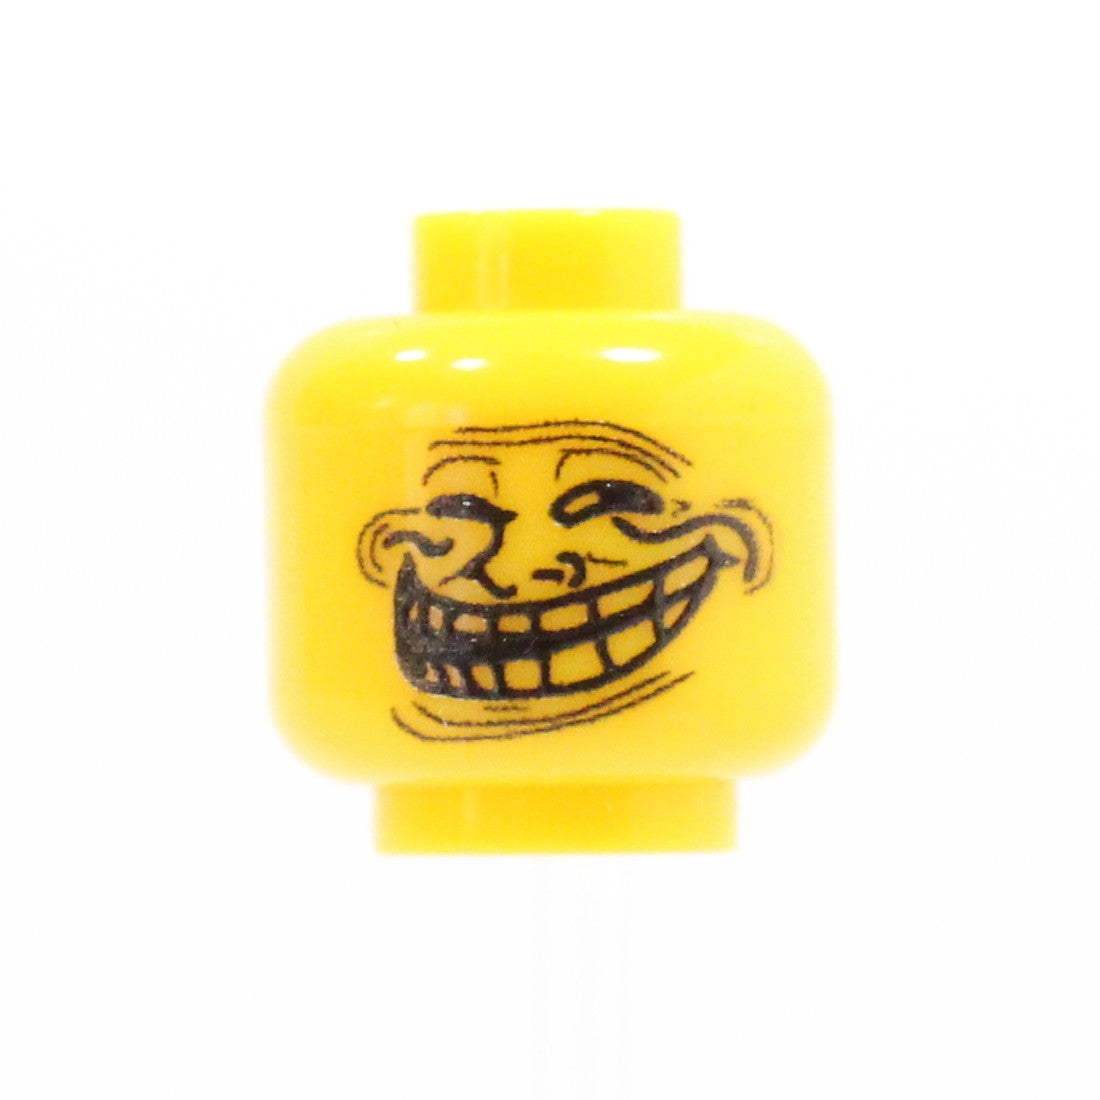 Troll Face Gifts & Merchandise for Sale